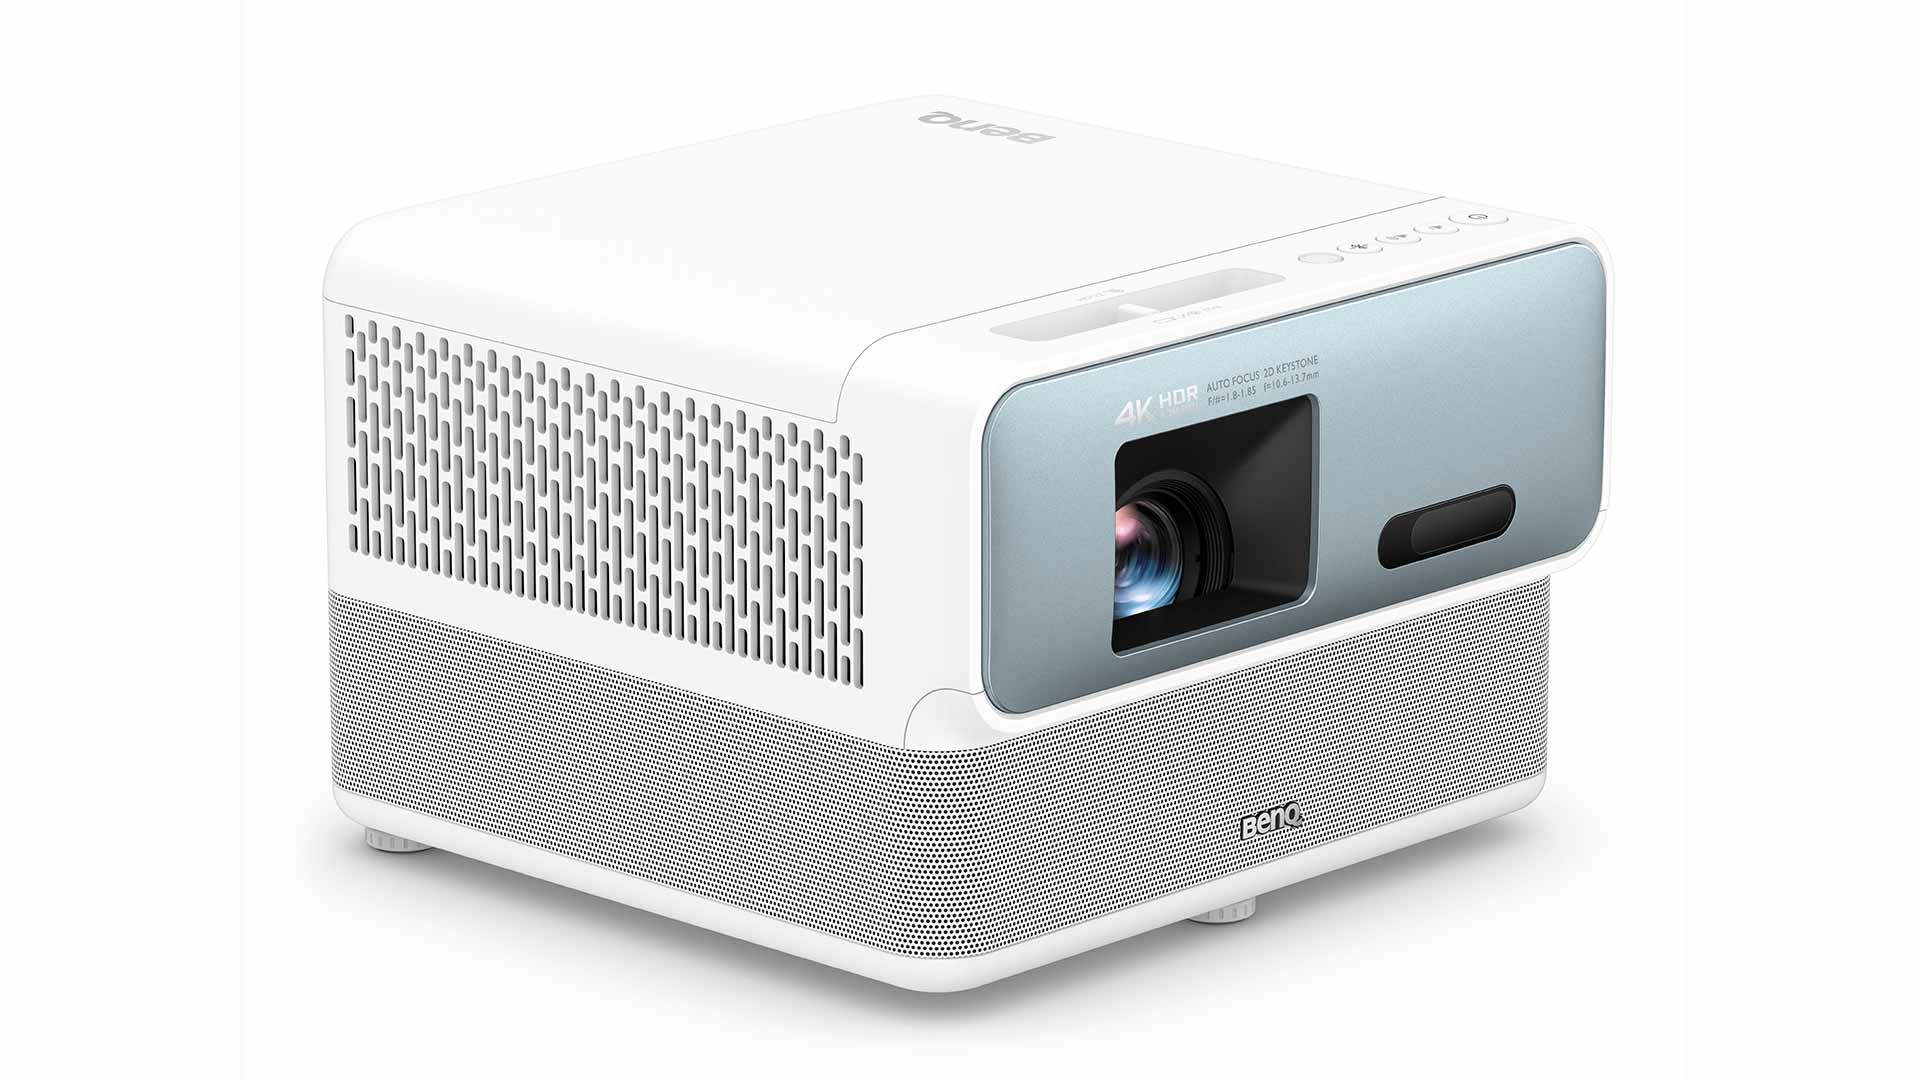 Benq Gp500 Projector Chassis - Projector Reviews - Image